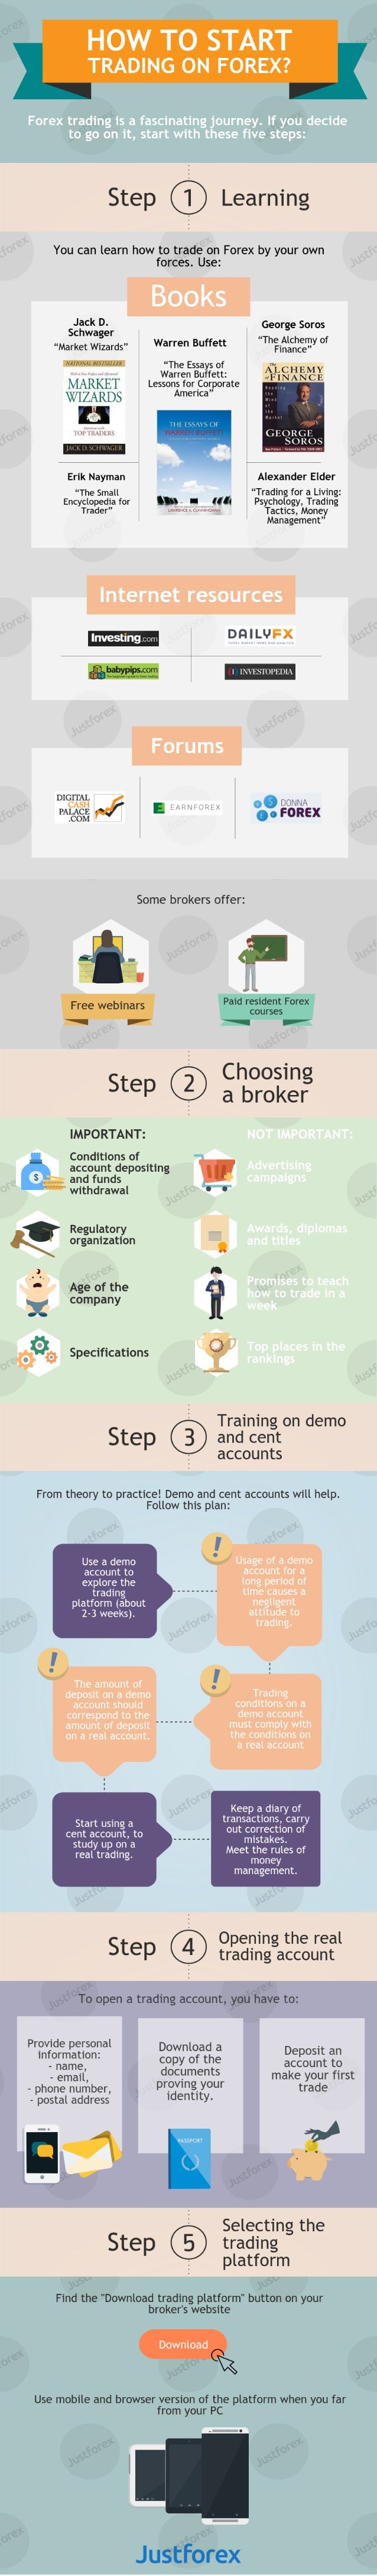 How to Start Trading on Forex? [INFOGRAPHIC]